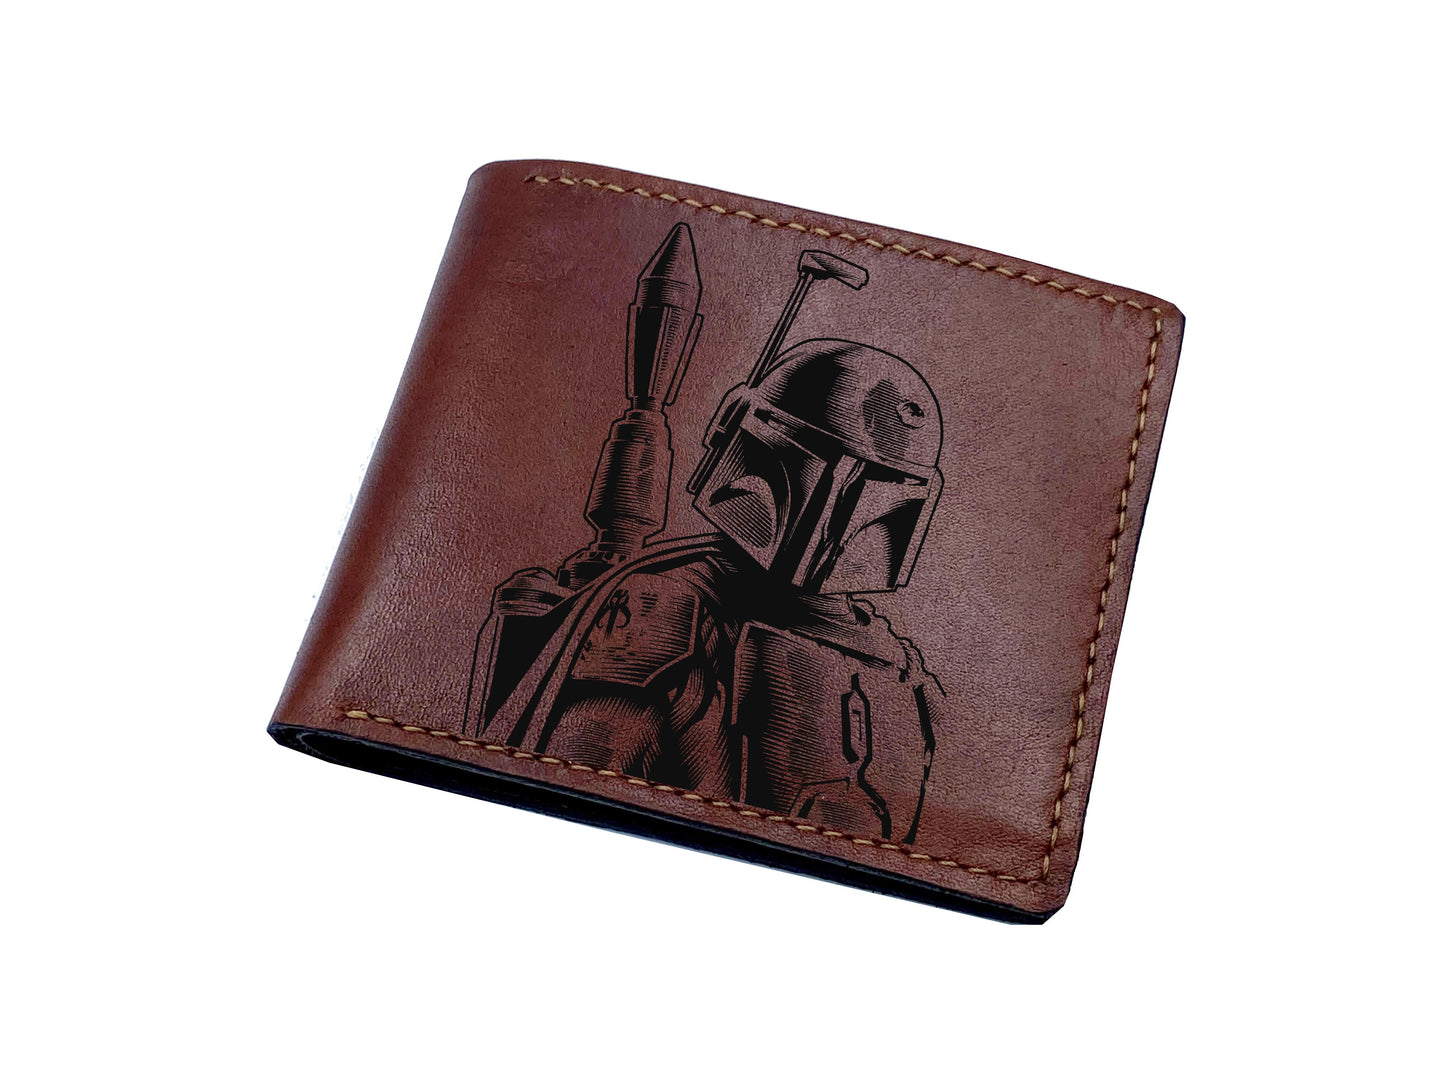 Darth Maul Sith Lord modern art wallet, personalized starwars gift for men, Starwars leather wallet for dad